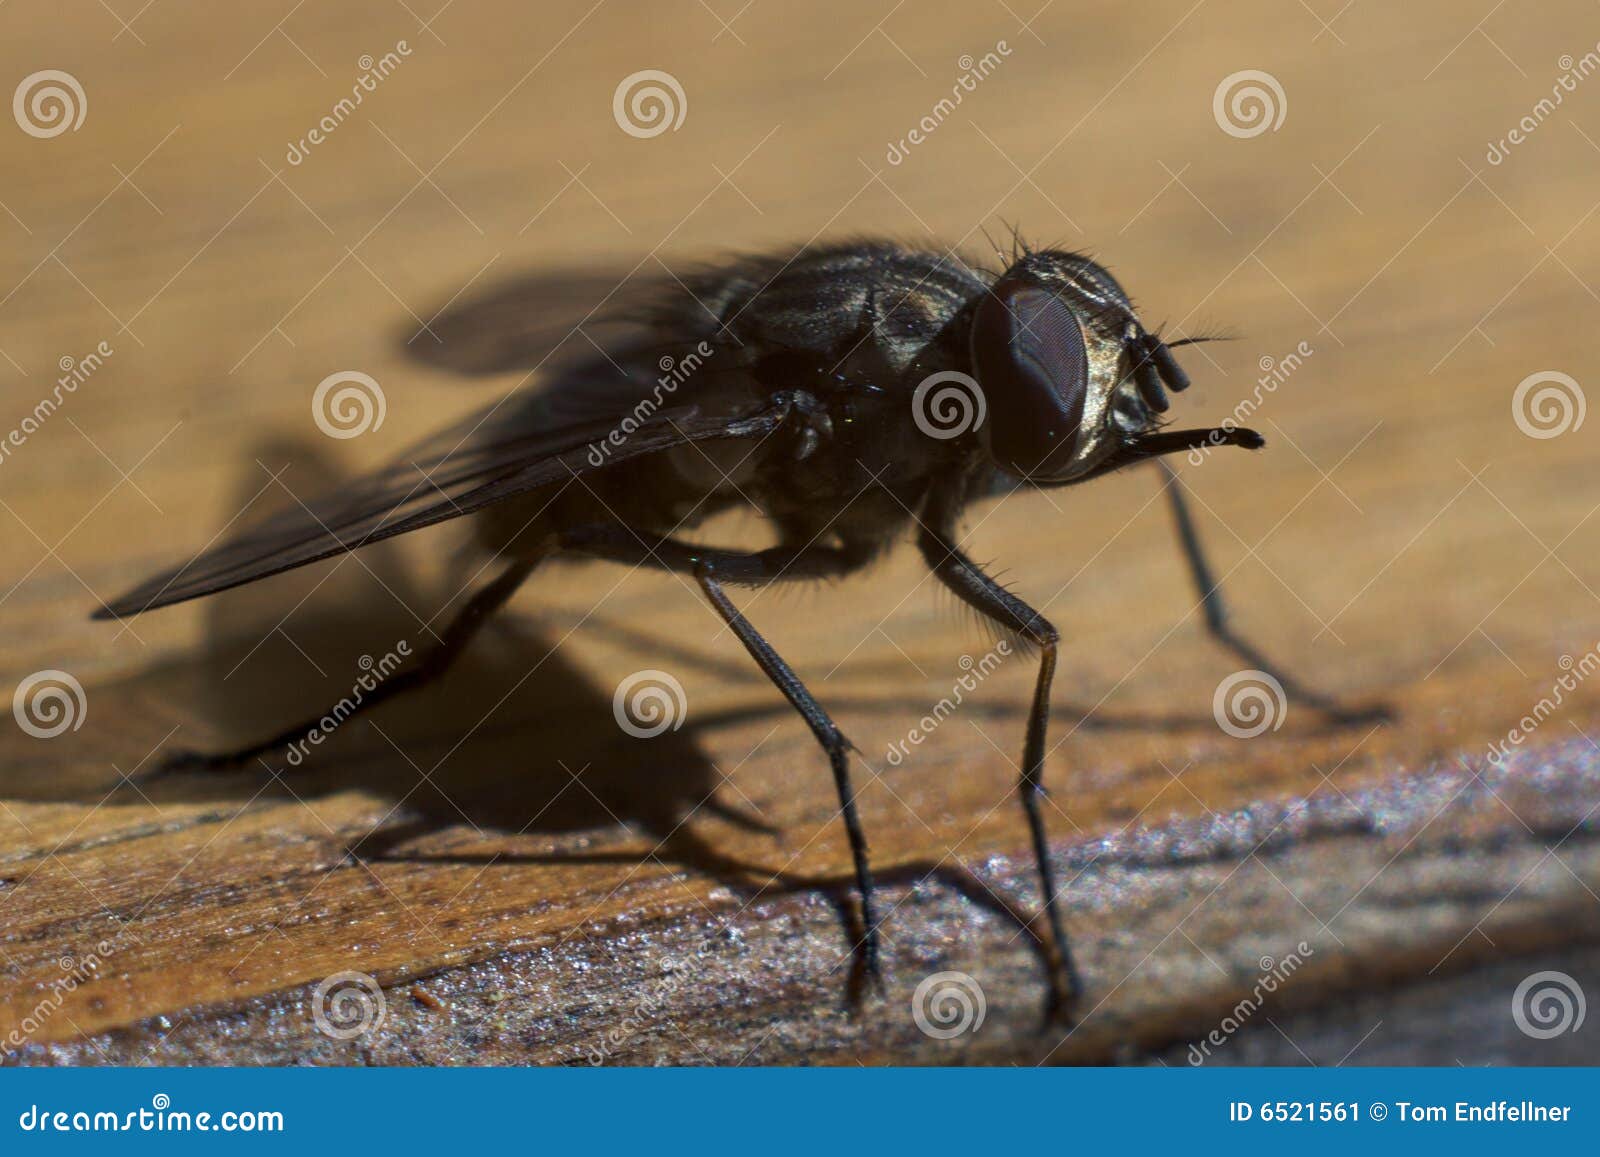 Close-up of house fly sitting at the edge of a garden table